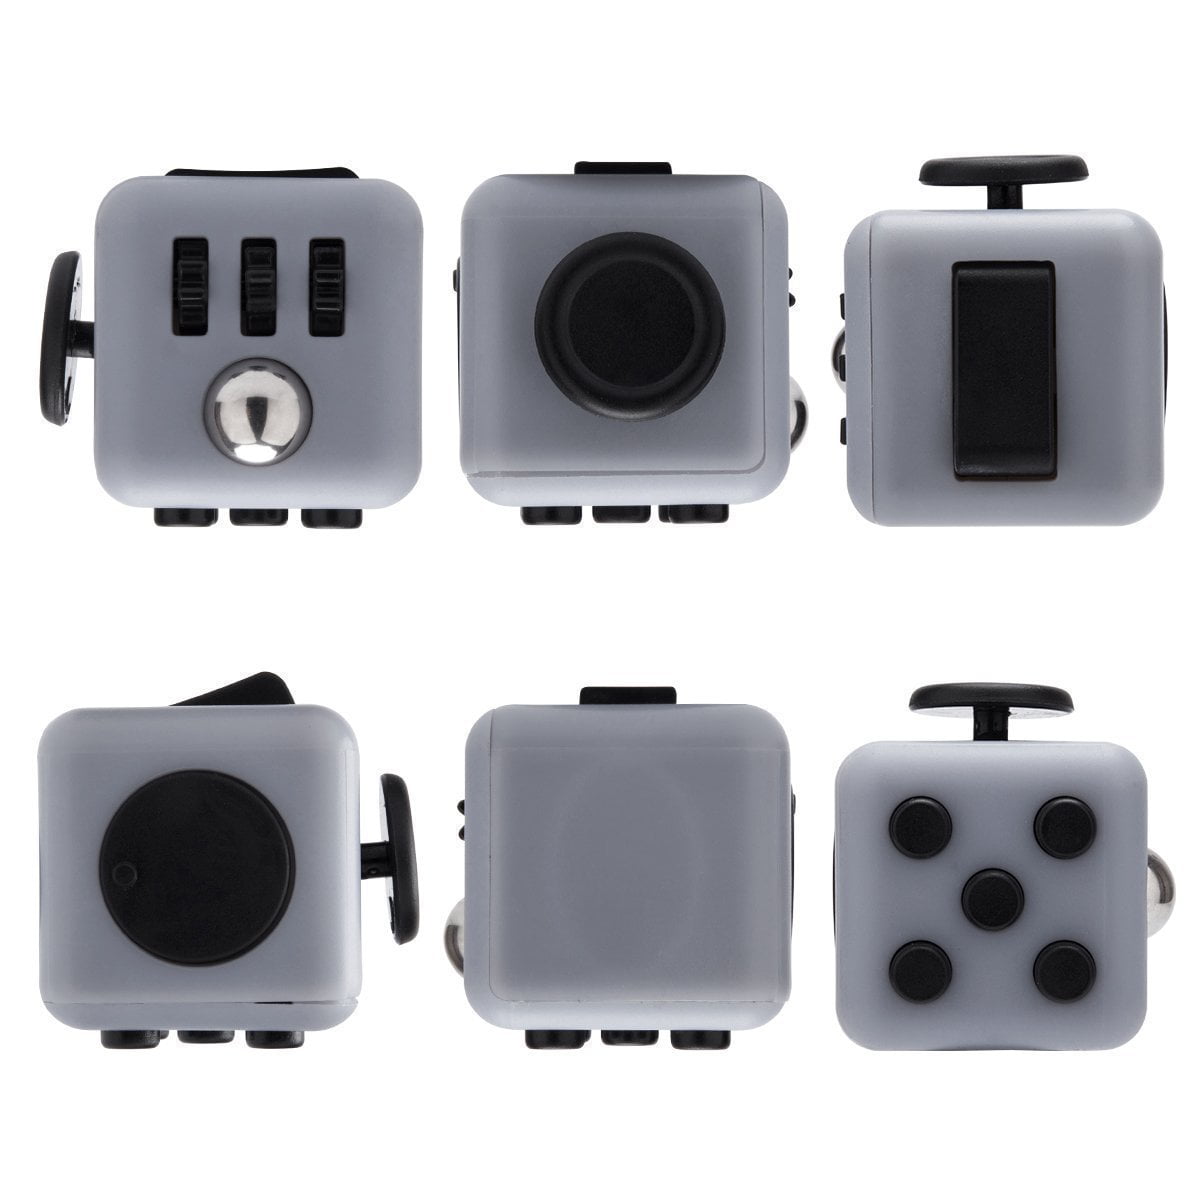 Fidget Controller Pad Cube,10 Fidget Features Relieve Stress Figit Cube ADHD 3-sided Flower Shape Anti-anxiety Hand Toy for ADD Autistic Children and Adults